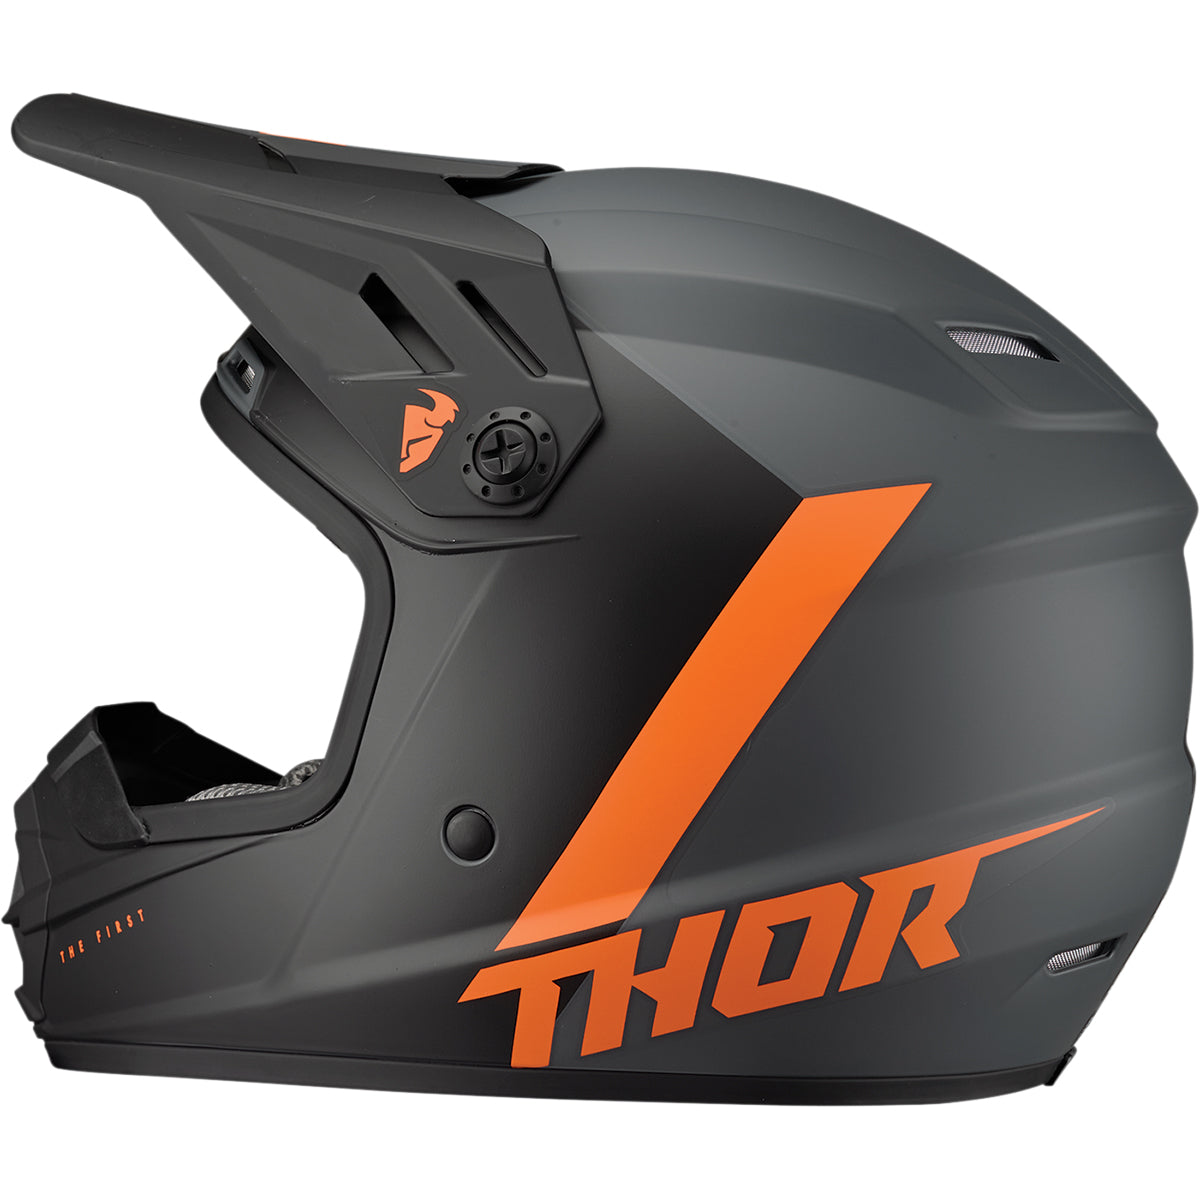 THOR Youth Sector Chev Helmet